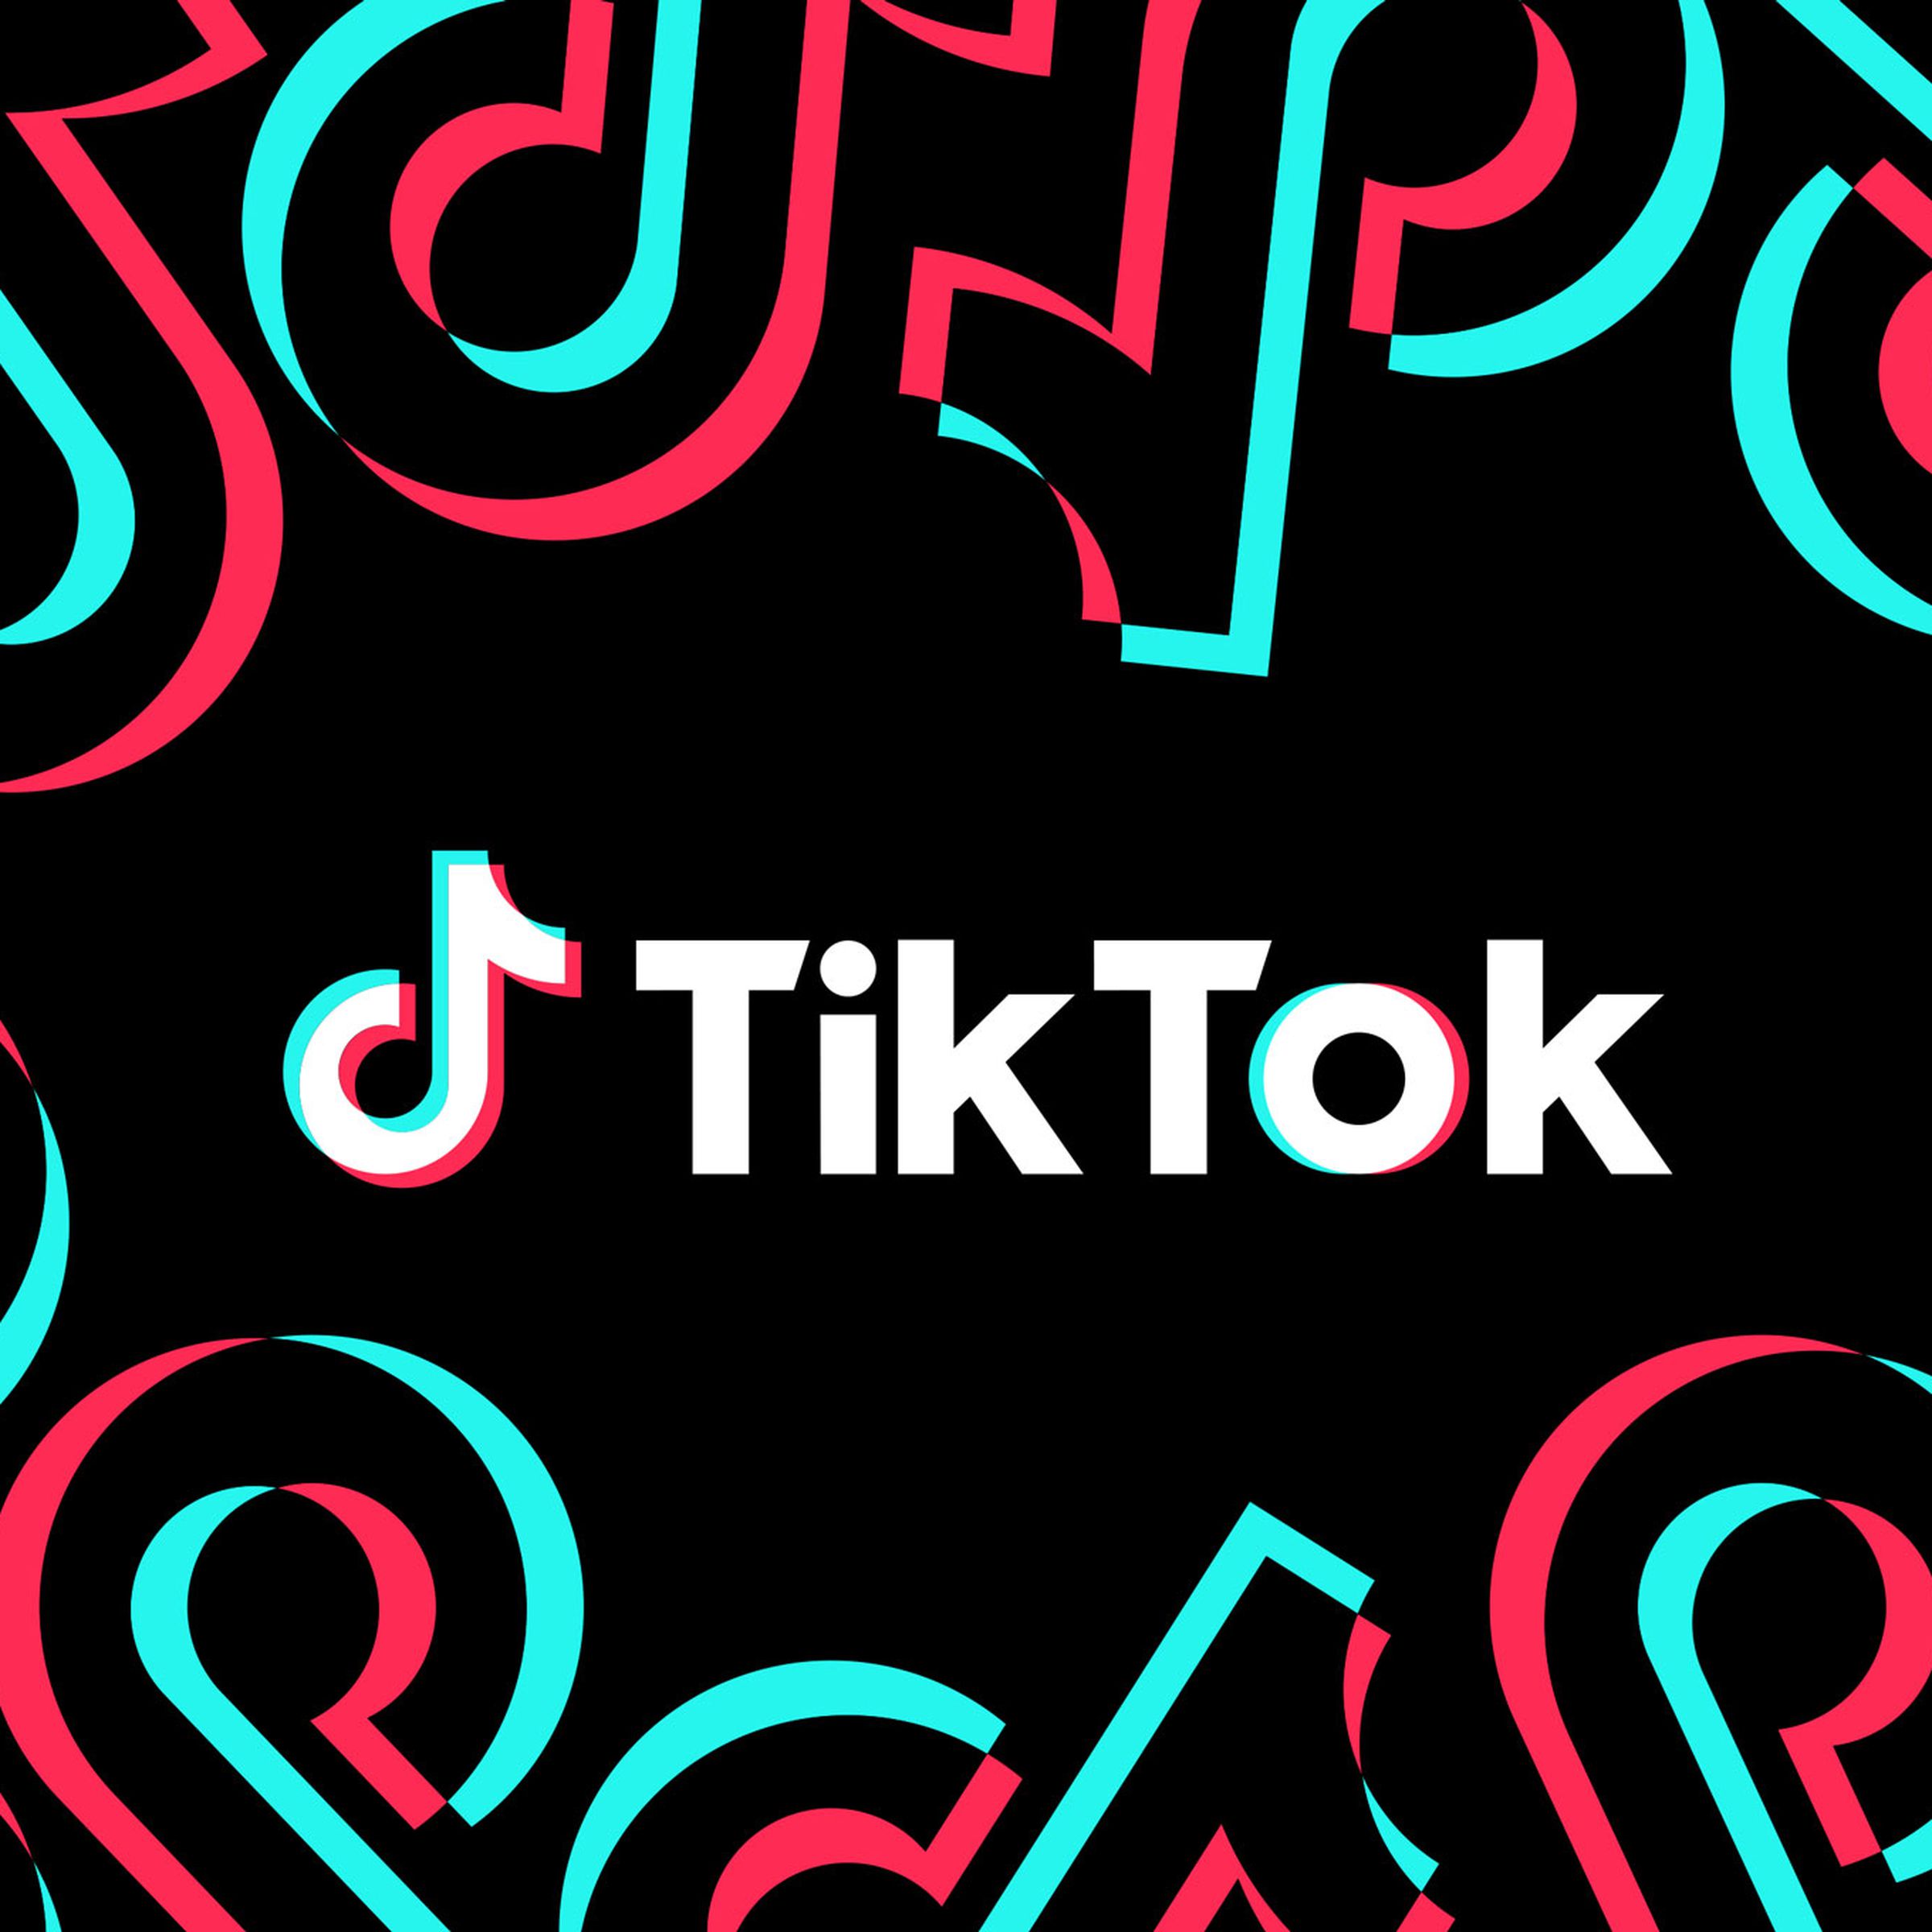 The TikTok logo on a black background with pink and blue repeating logos around the edges.